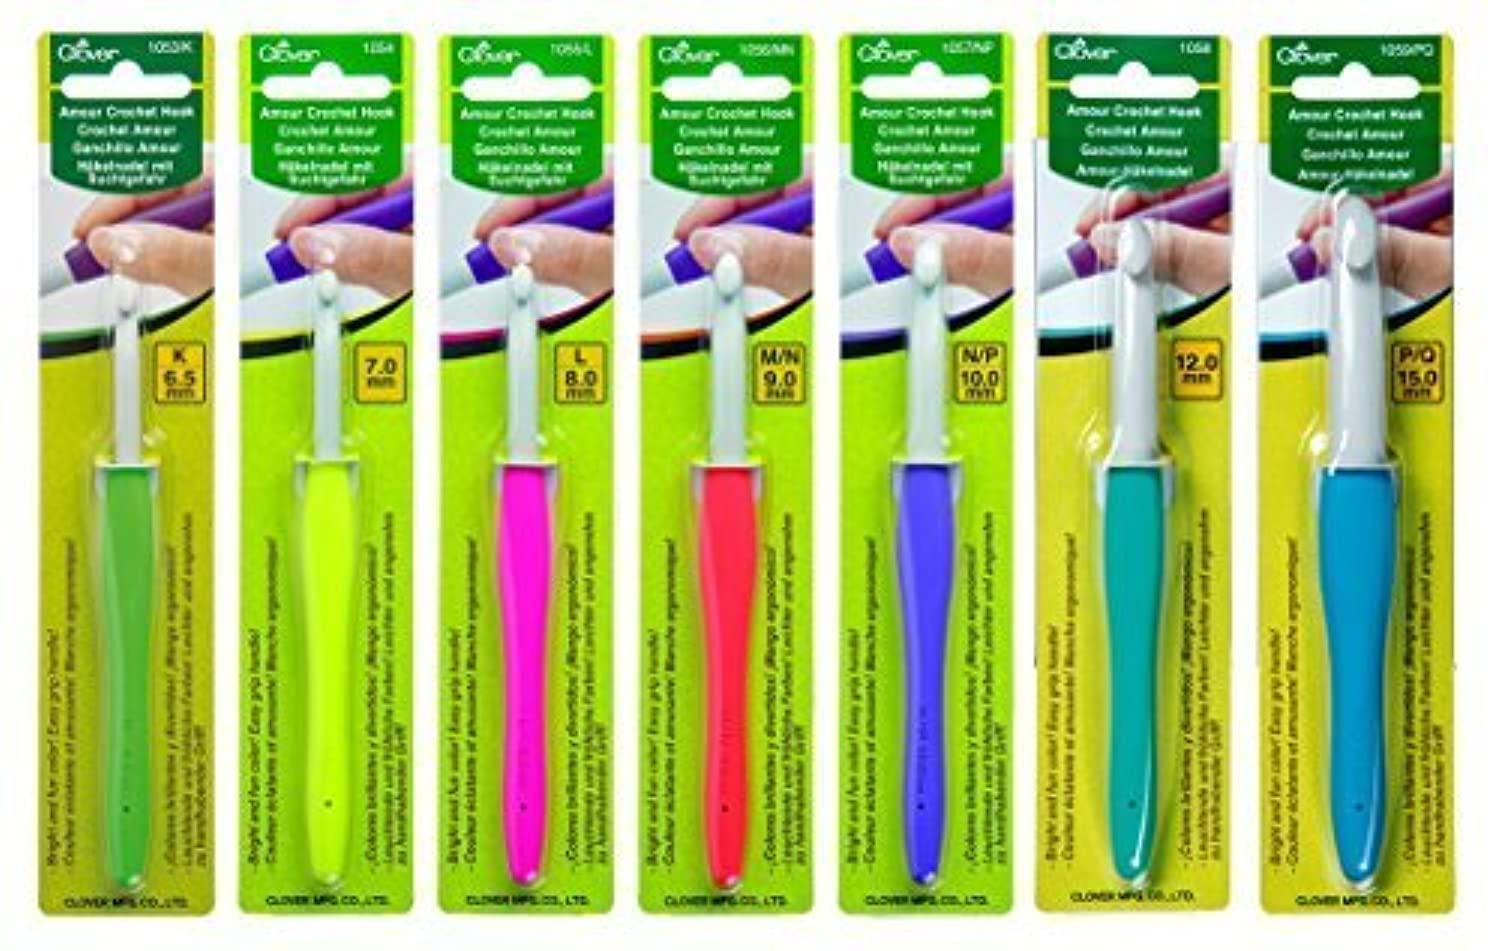 Clover Amour Crochet Hooks - Set Of 7 - For Working With Thick Yarns